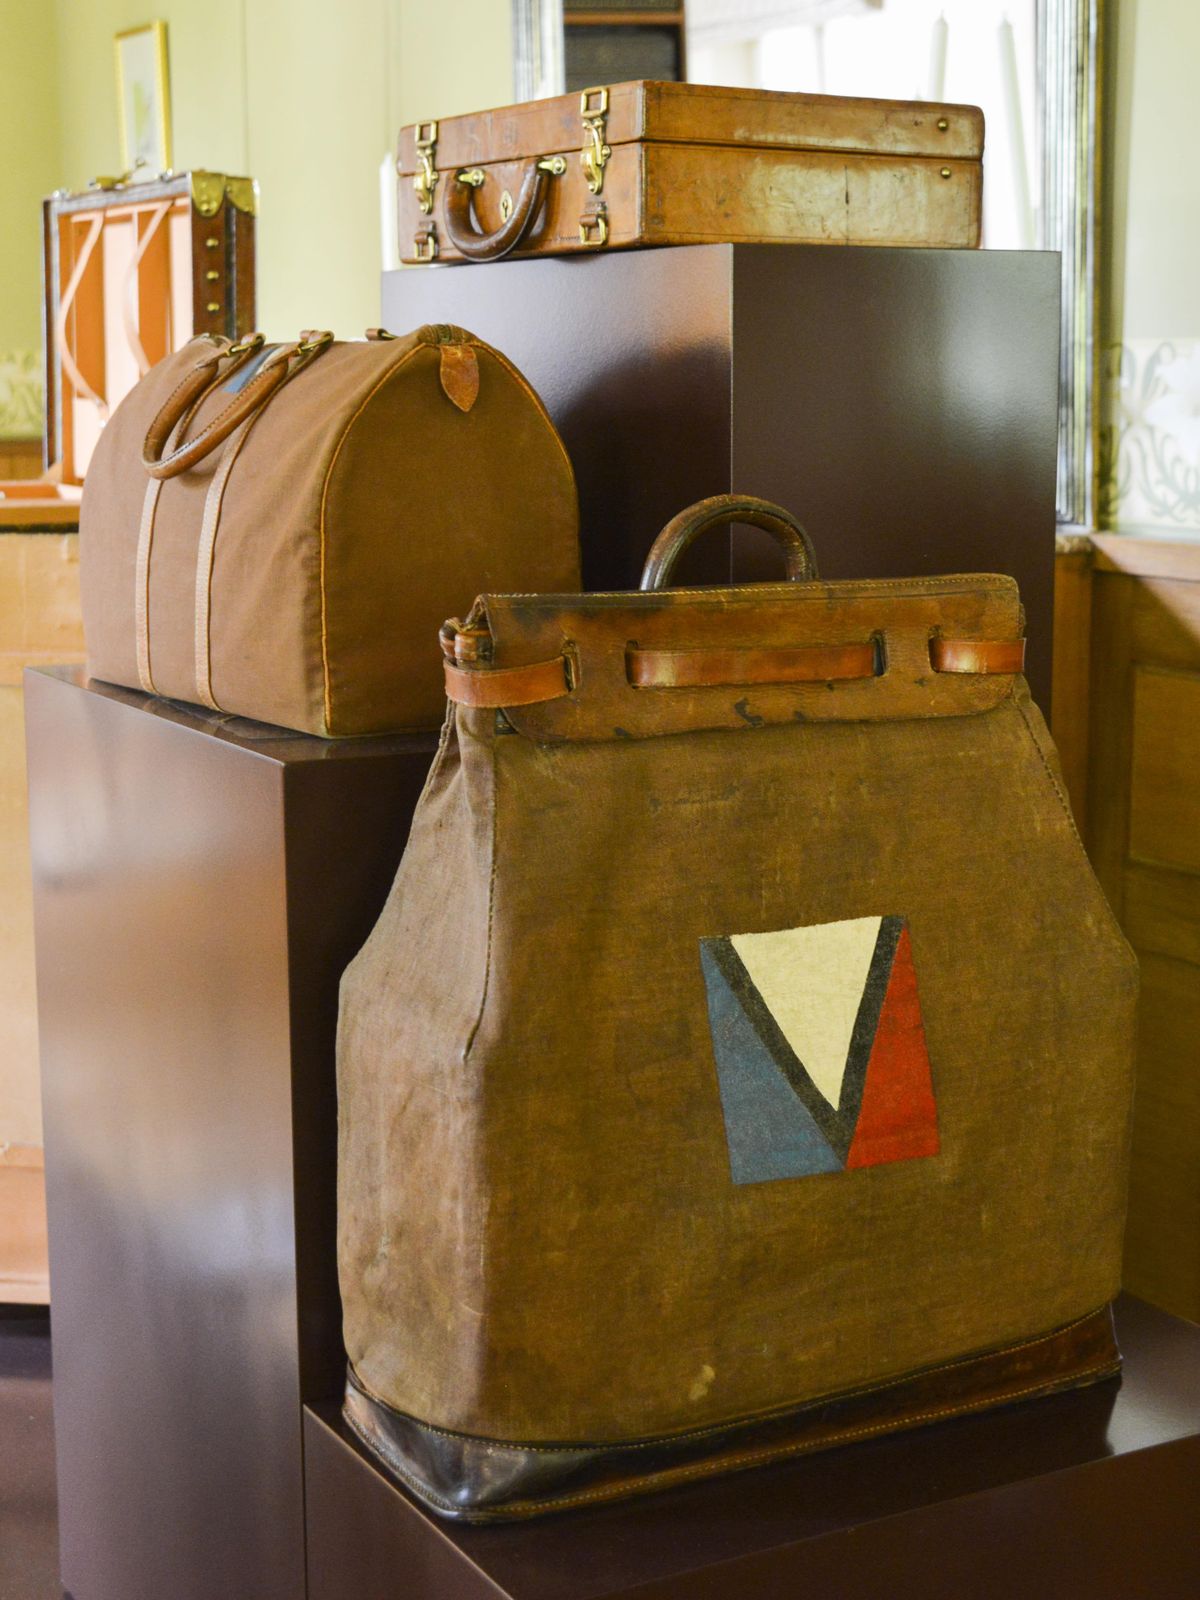 As travel changed, so did travel bags. Created in 1901, the canvas